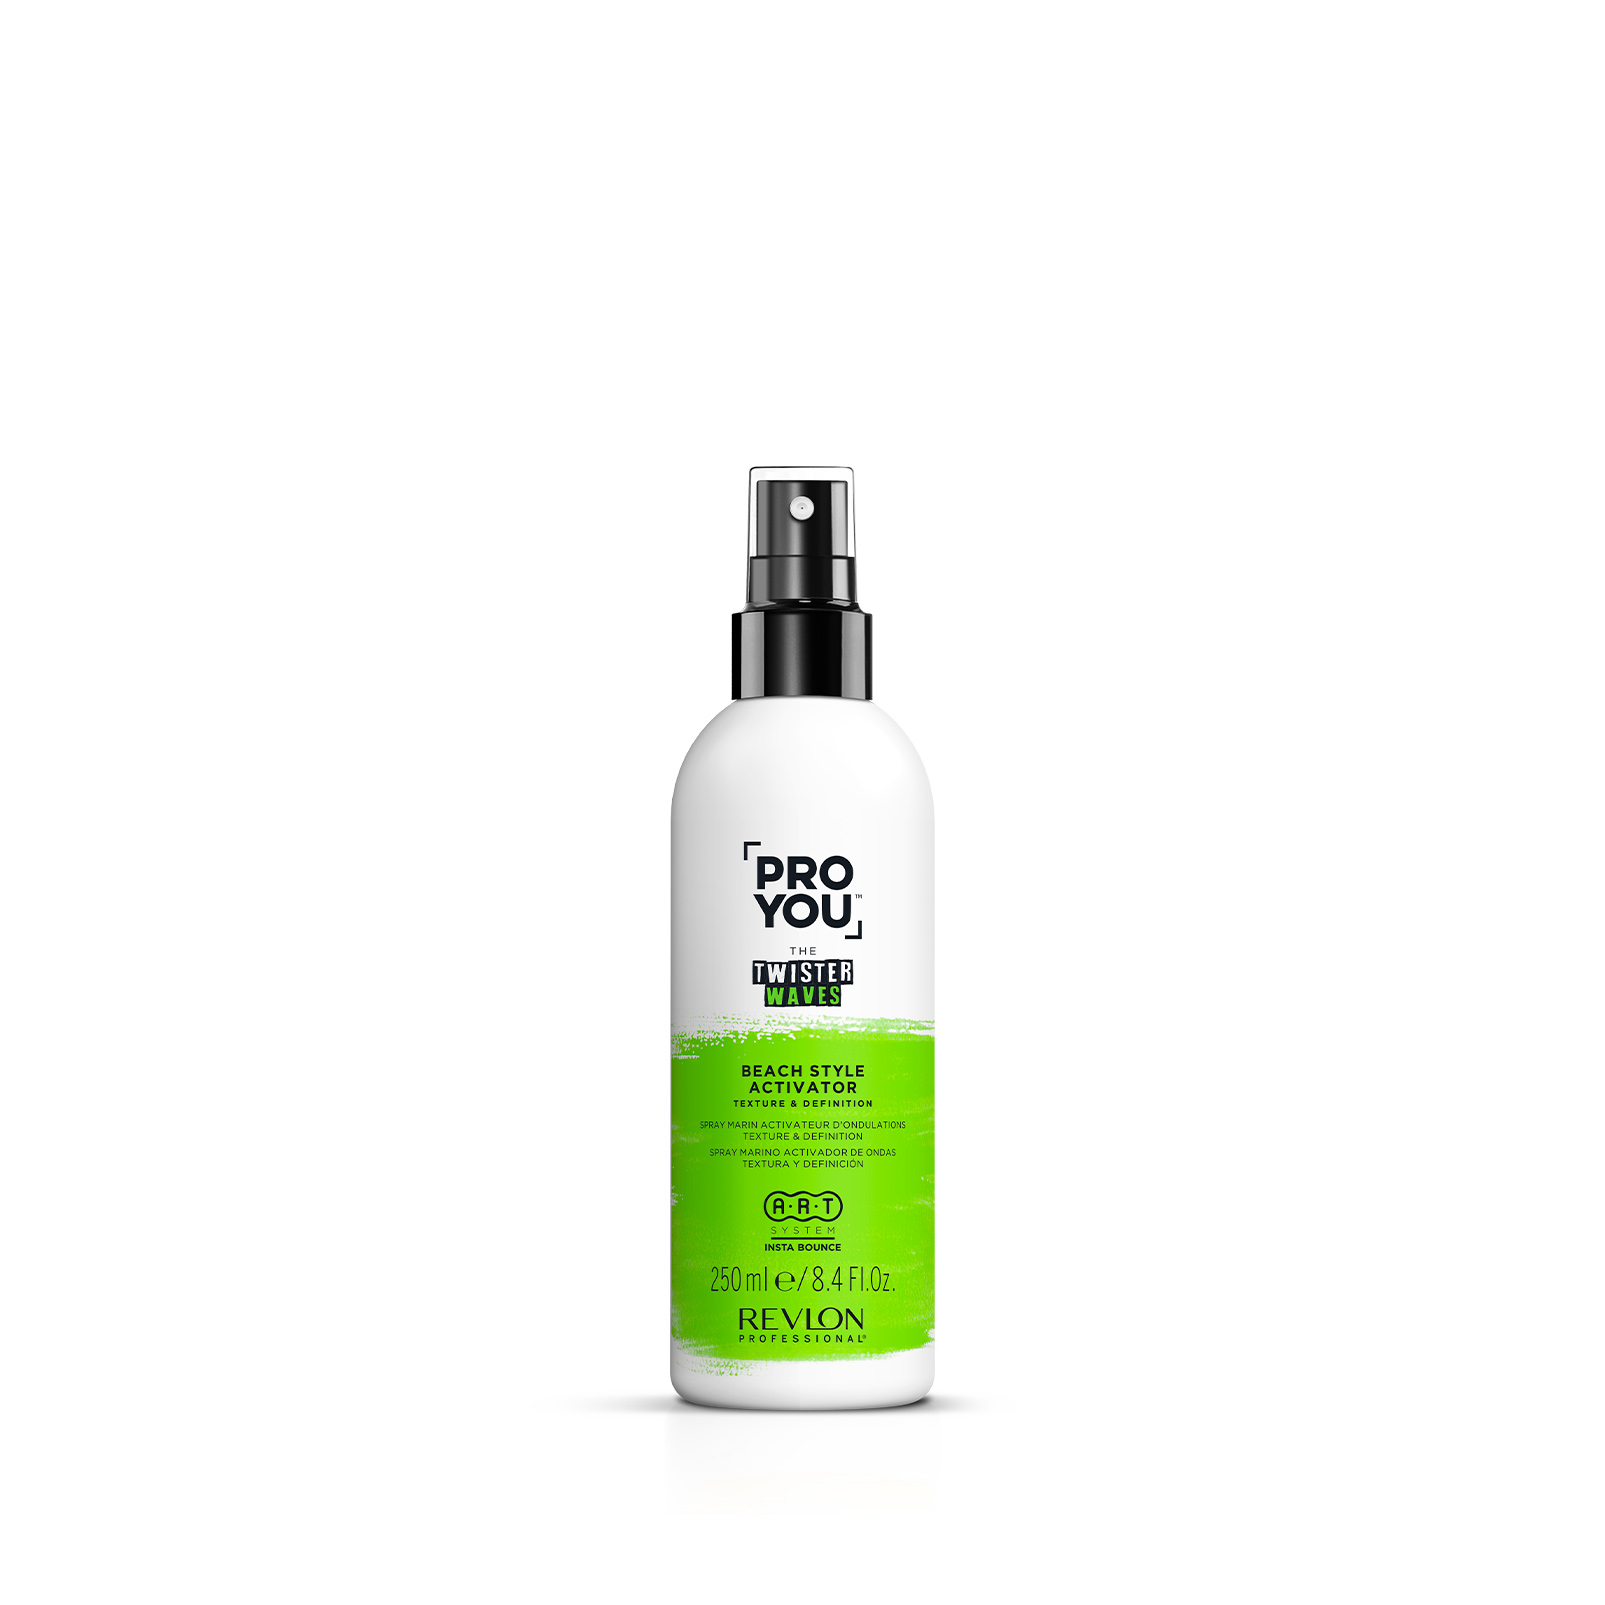 Pro You Styling The Twister Waves Beach Style Activator